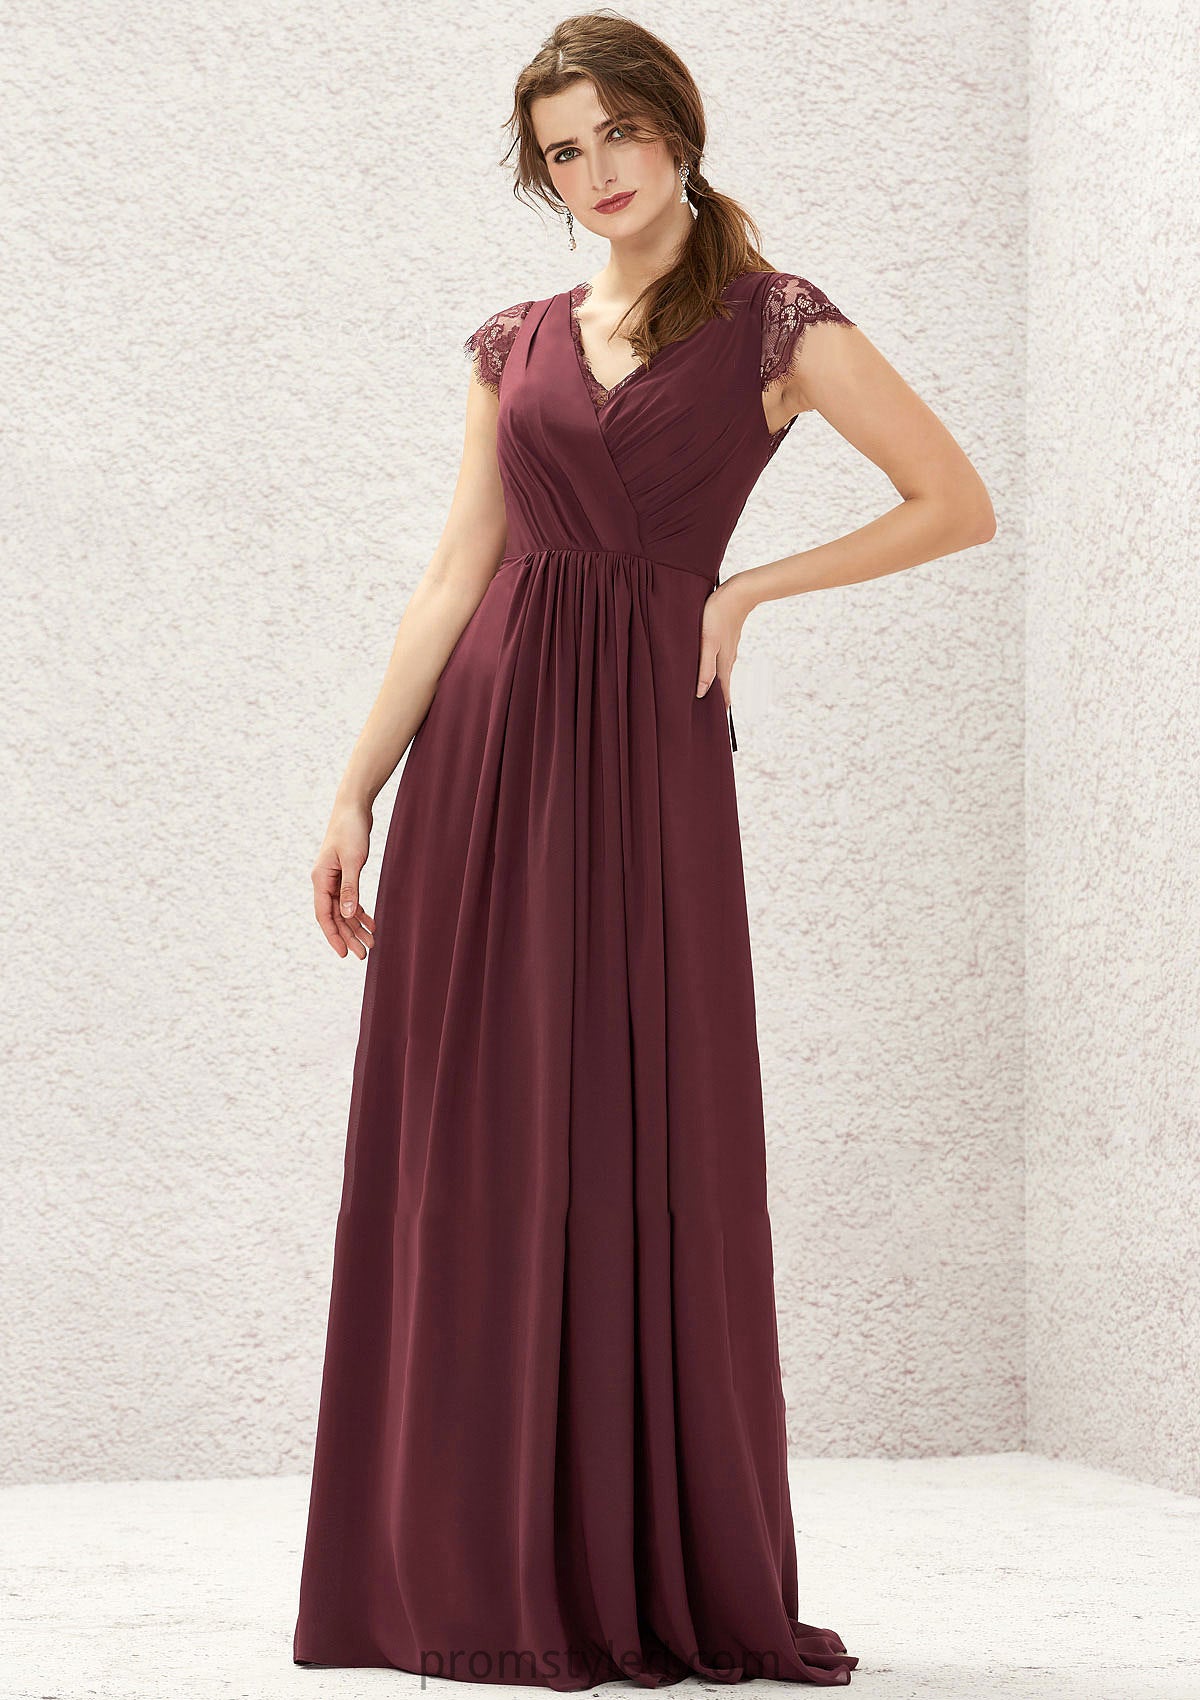 A-line V Neck Sleeveless Chiffon Long/Floor-Length Bridesmaid Dresses With Pleated Lace Macey HLP0025627